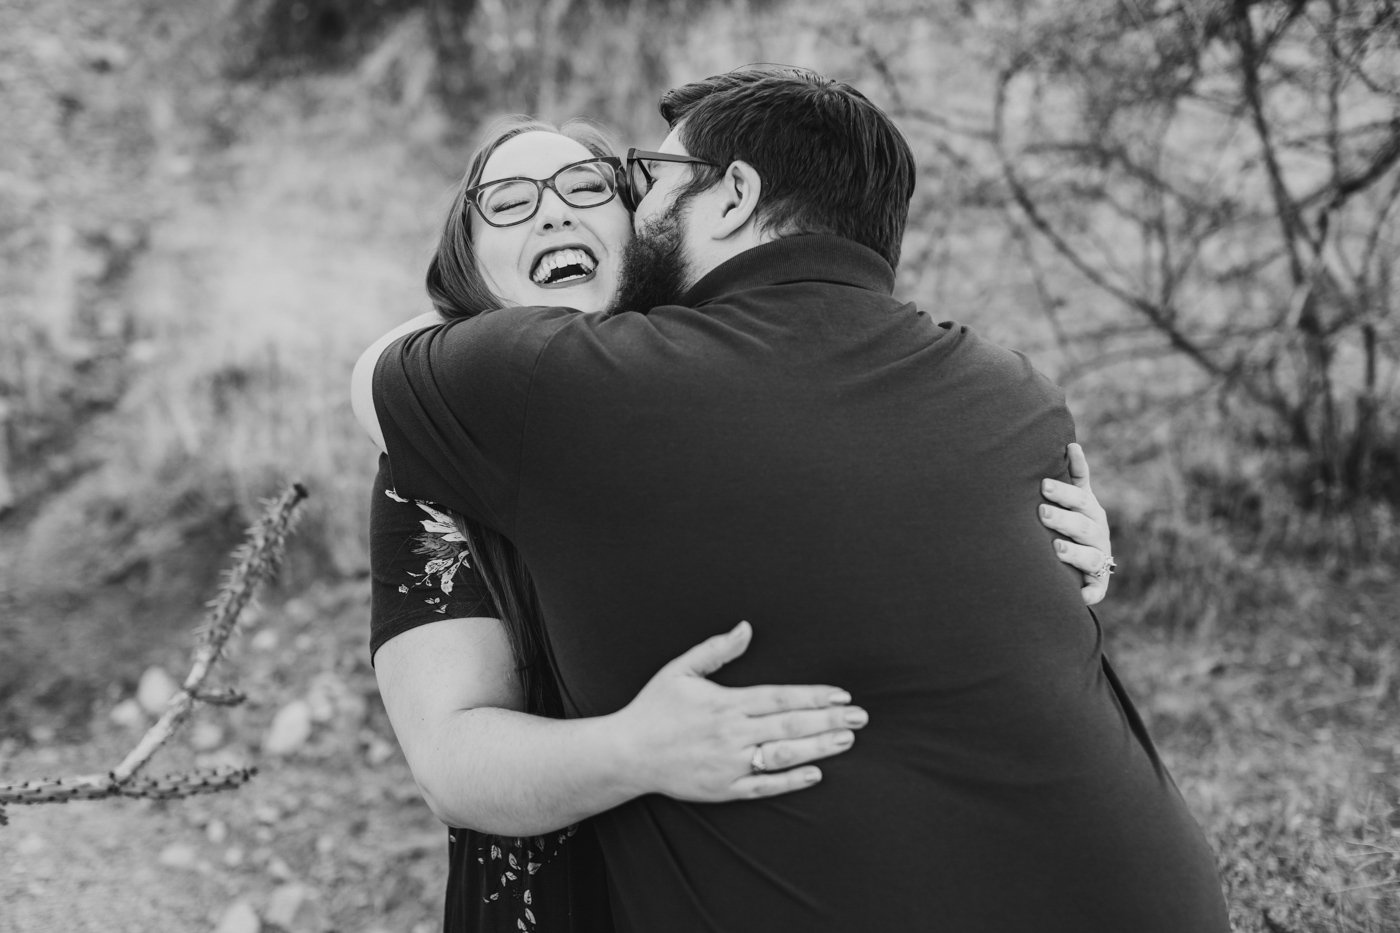 man surprises fiance with hug while she laughs